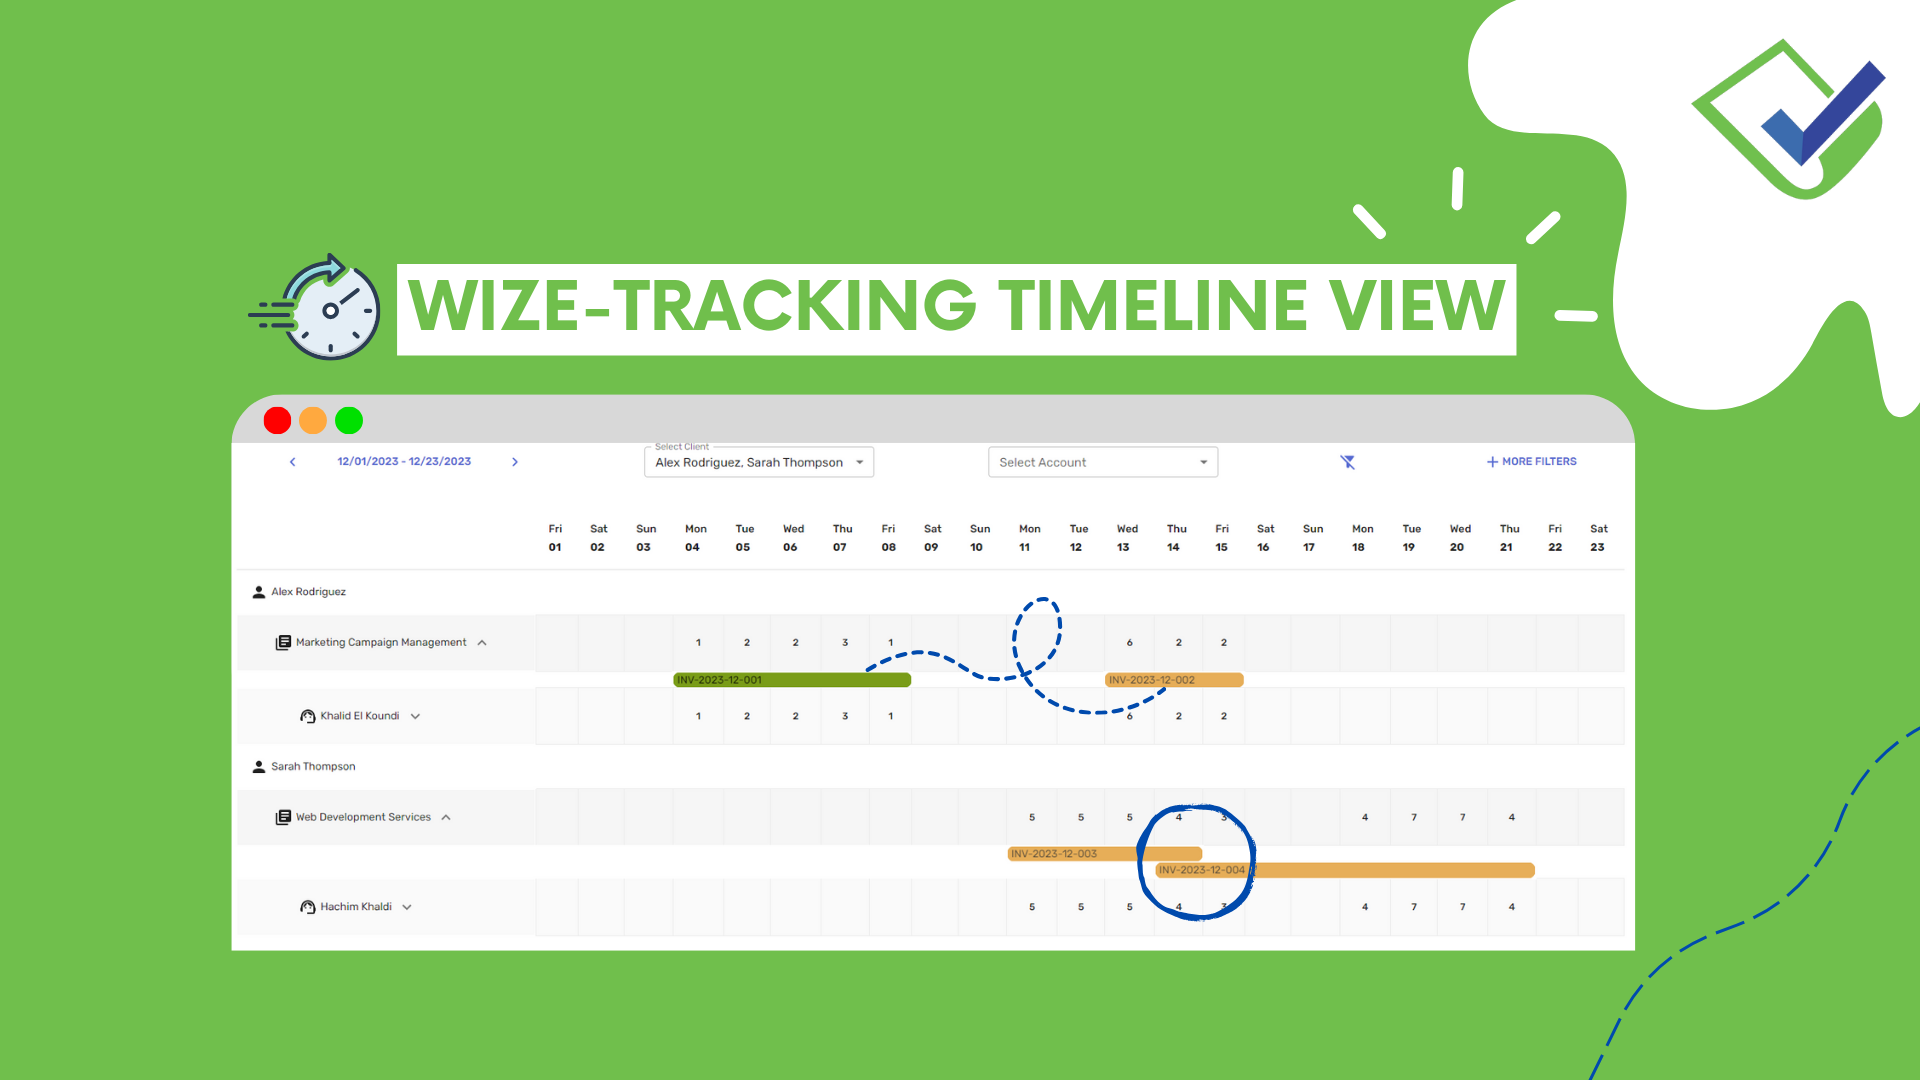 With BillWize's Wize tracking feature, you can identify potential invoice opportunities and avoid sending out duplicate invoices with ease.